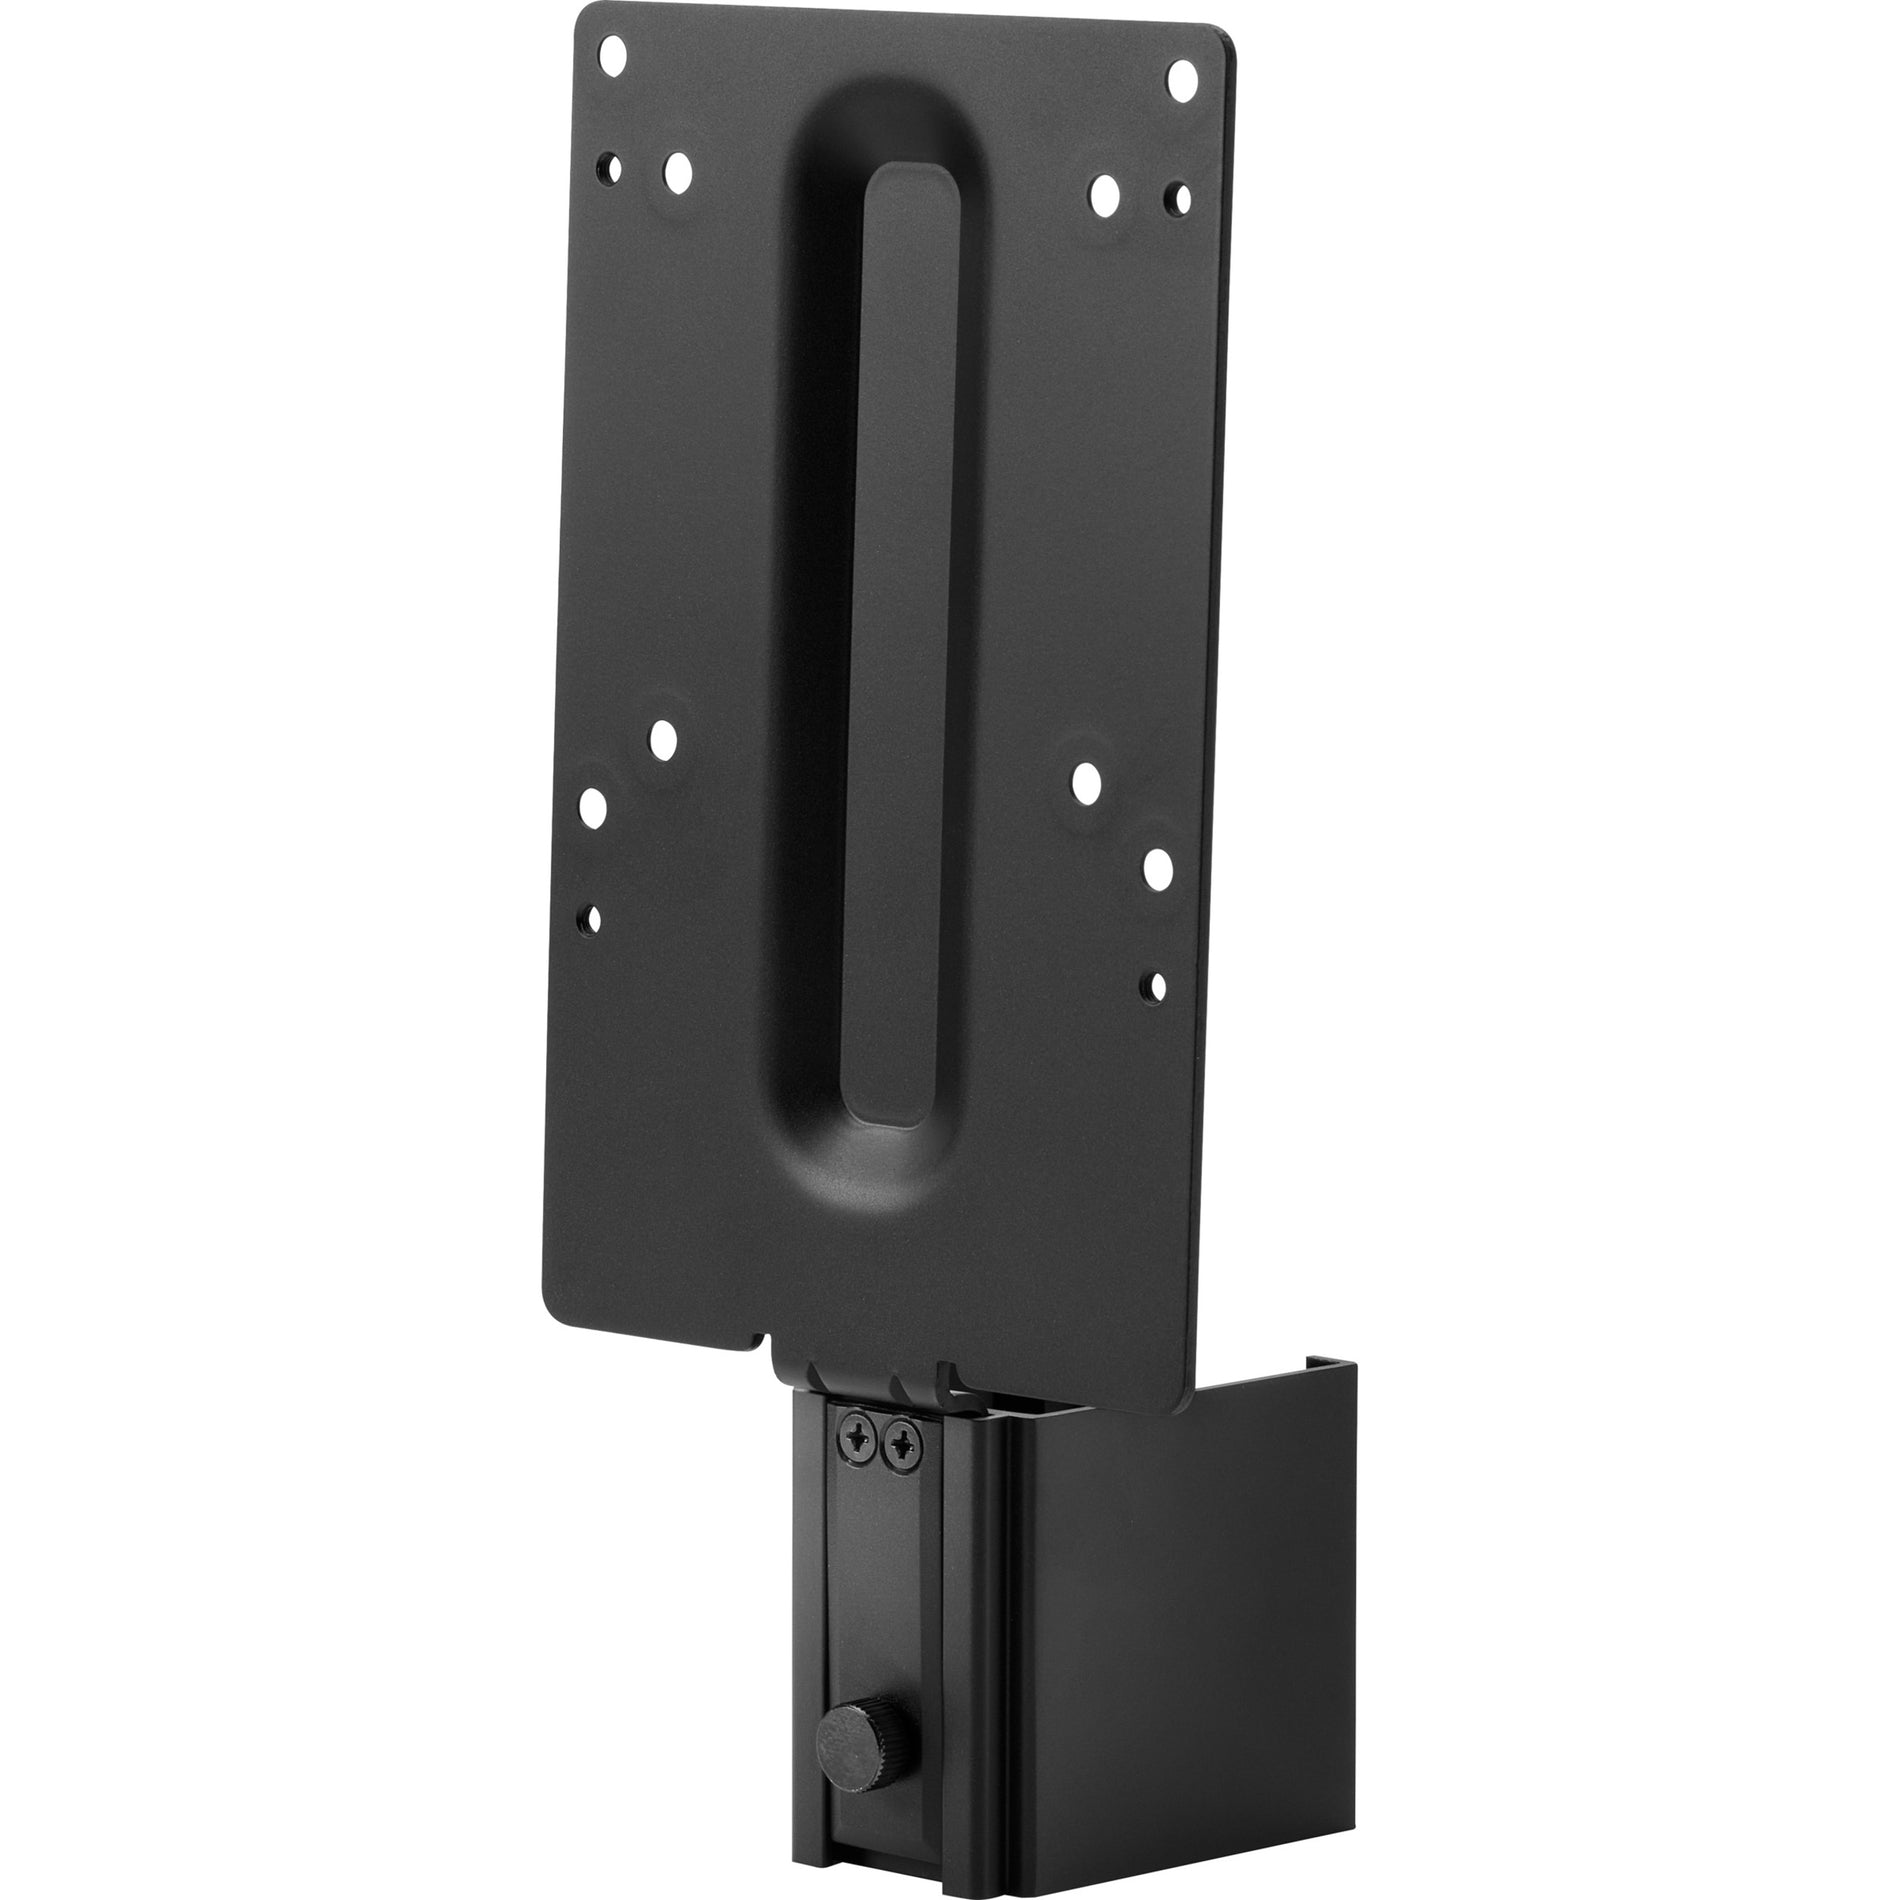 HP 8RA46AT B250 Mounting Bracket for LCD Display, Thin Client - Black